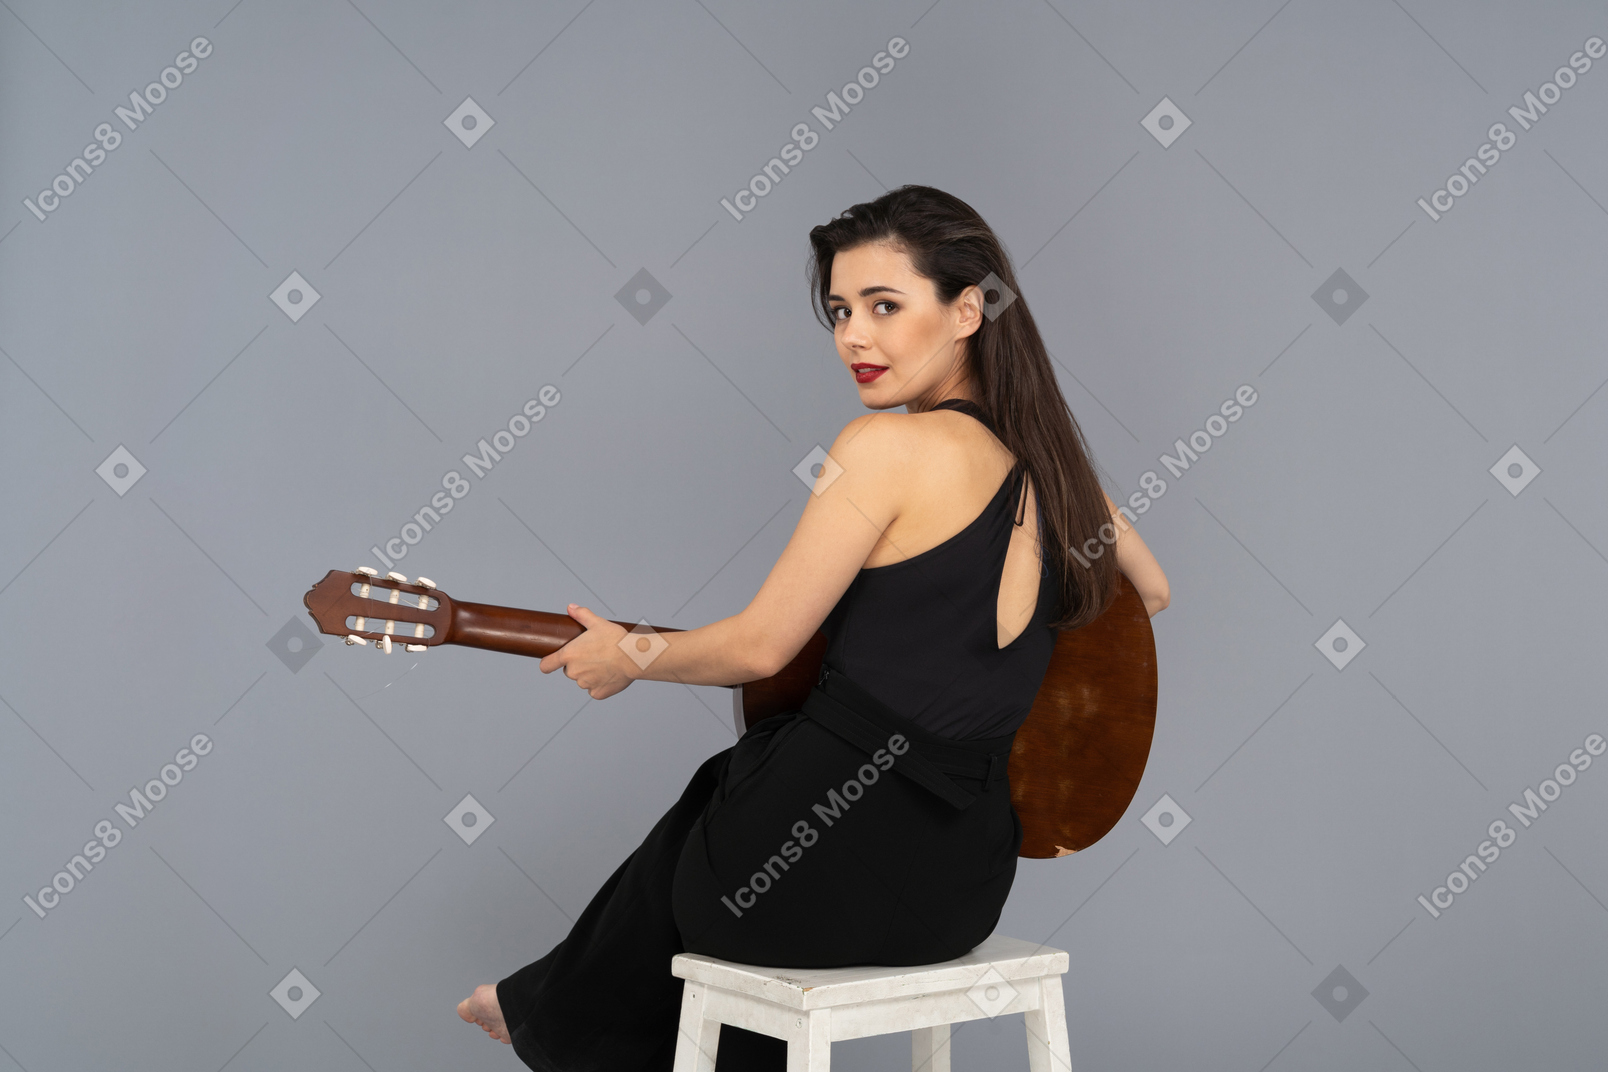 Beautiful woman playing a guitar while sitting half turned to a camera